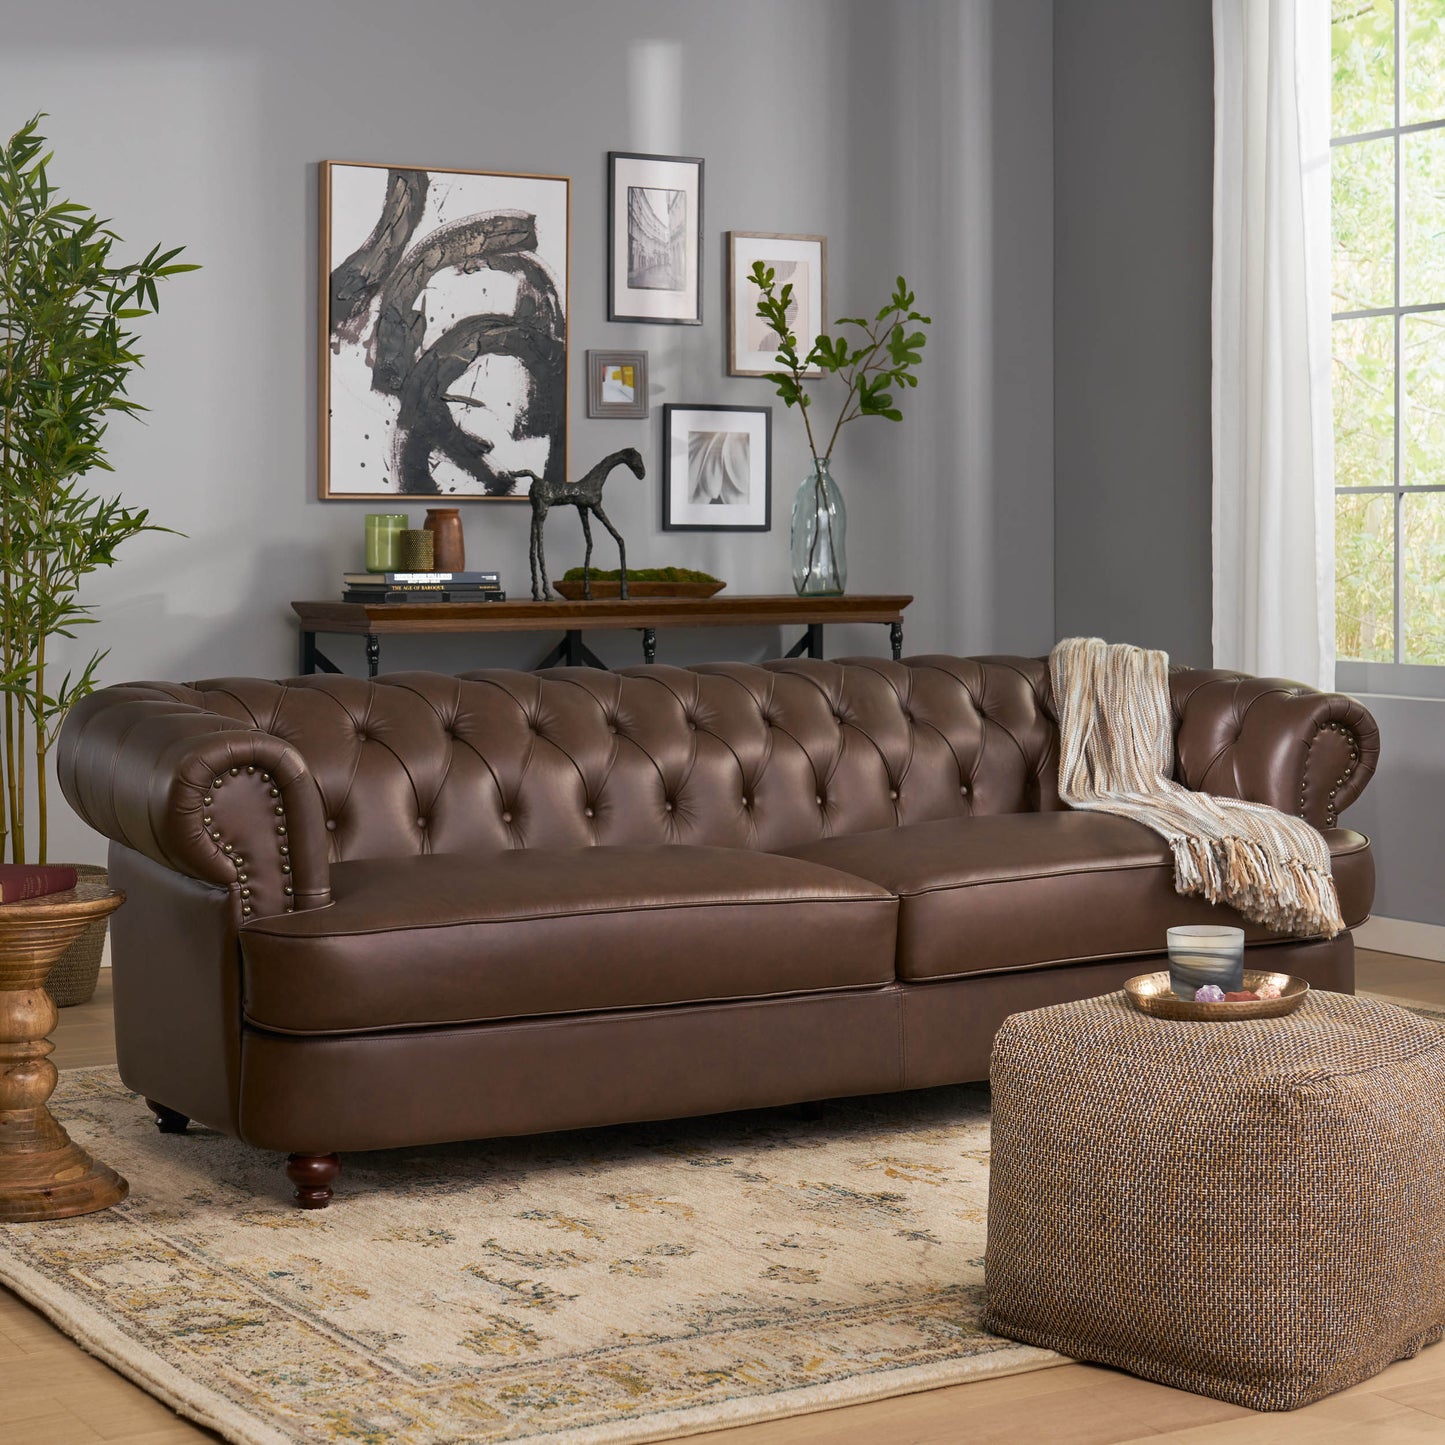 Saley Contemporary Leather Tufted 3 Seater Sofa with Nailhead Trim